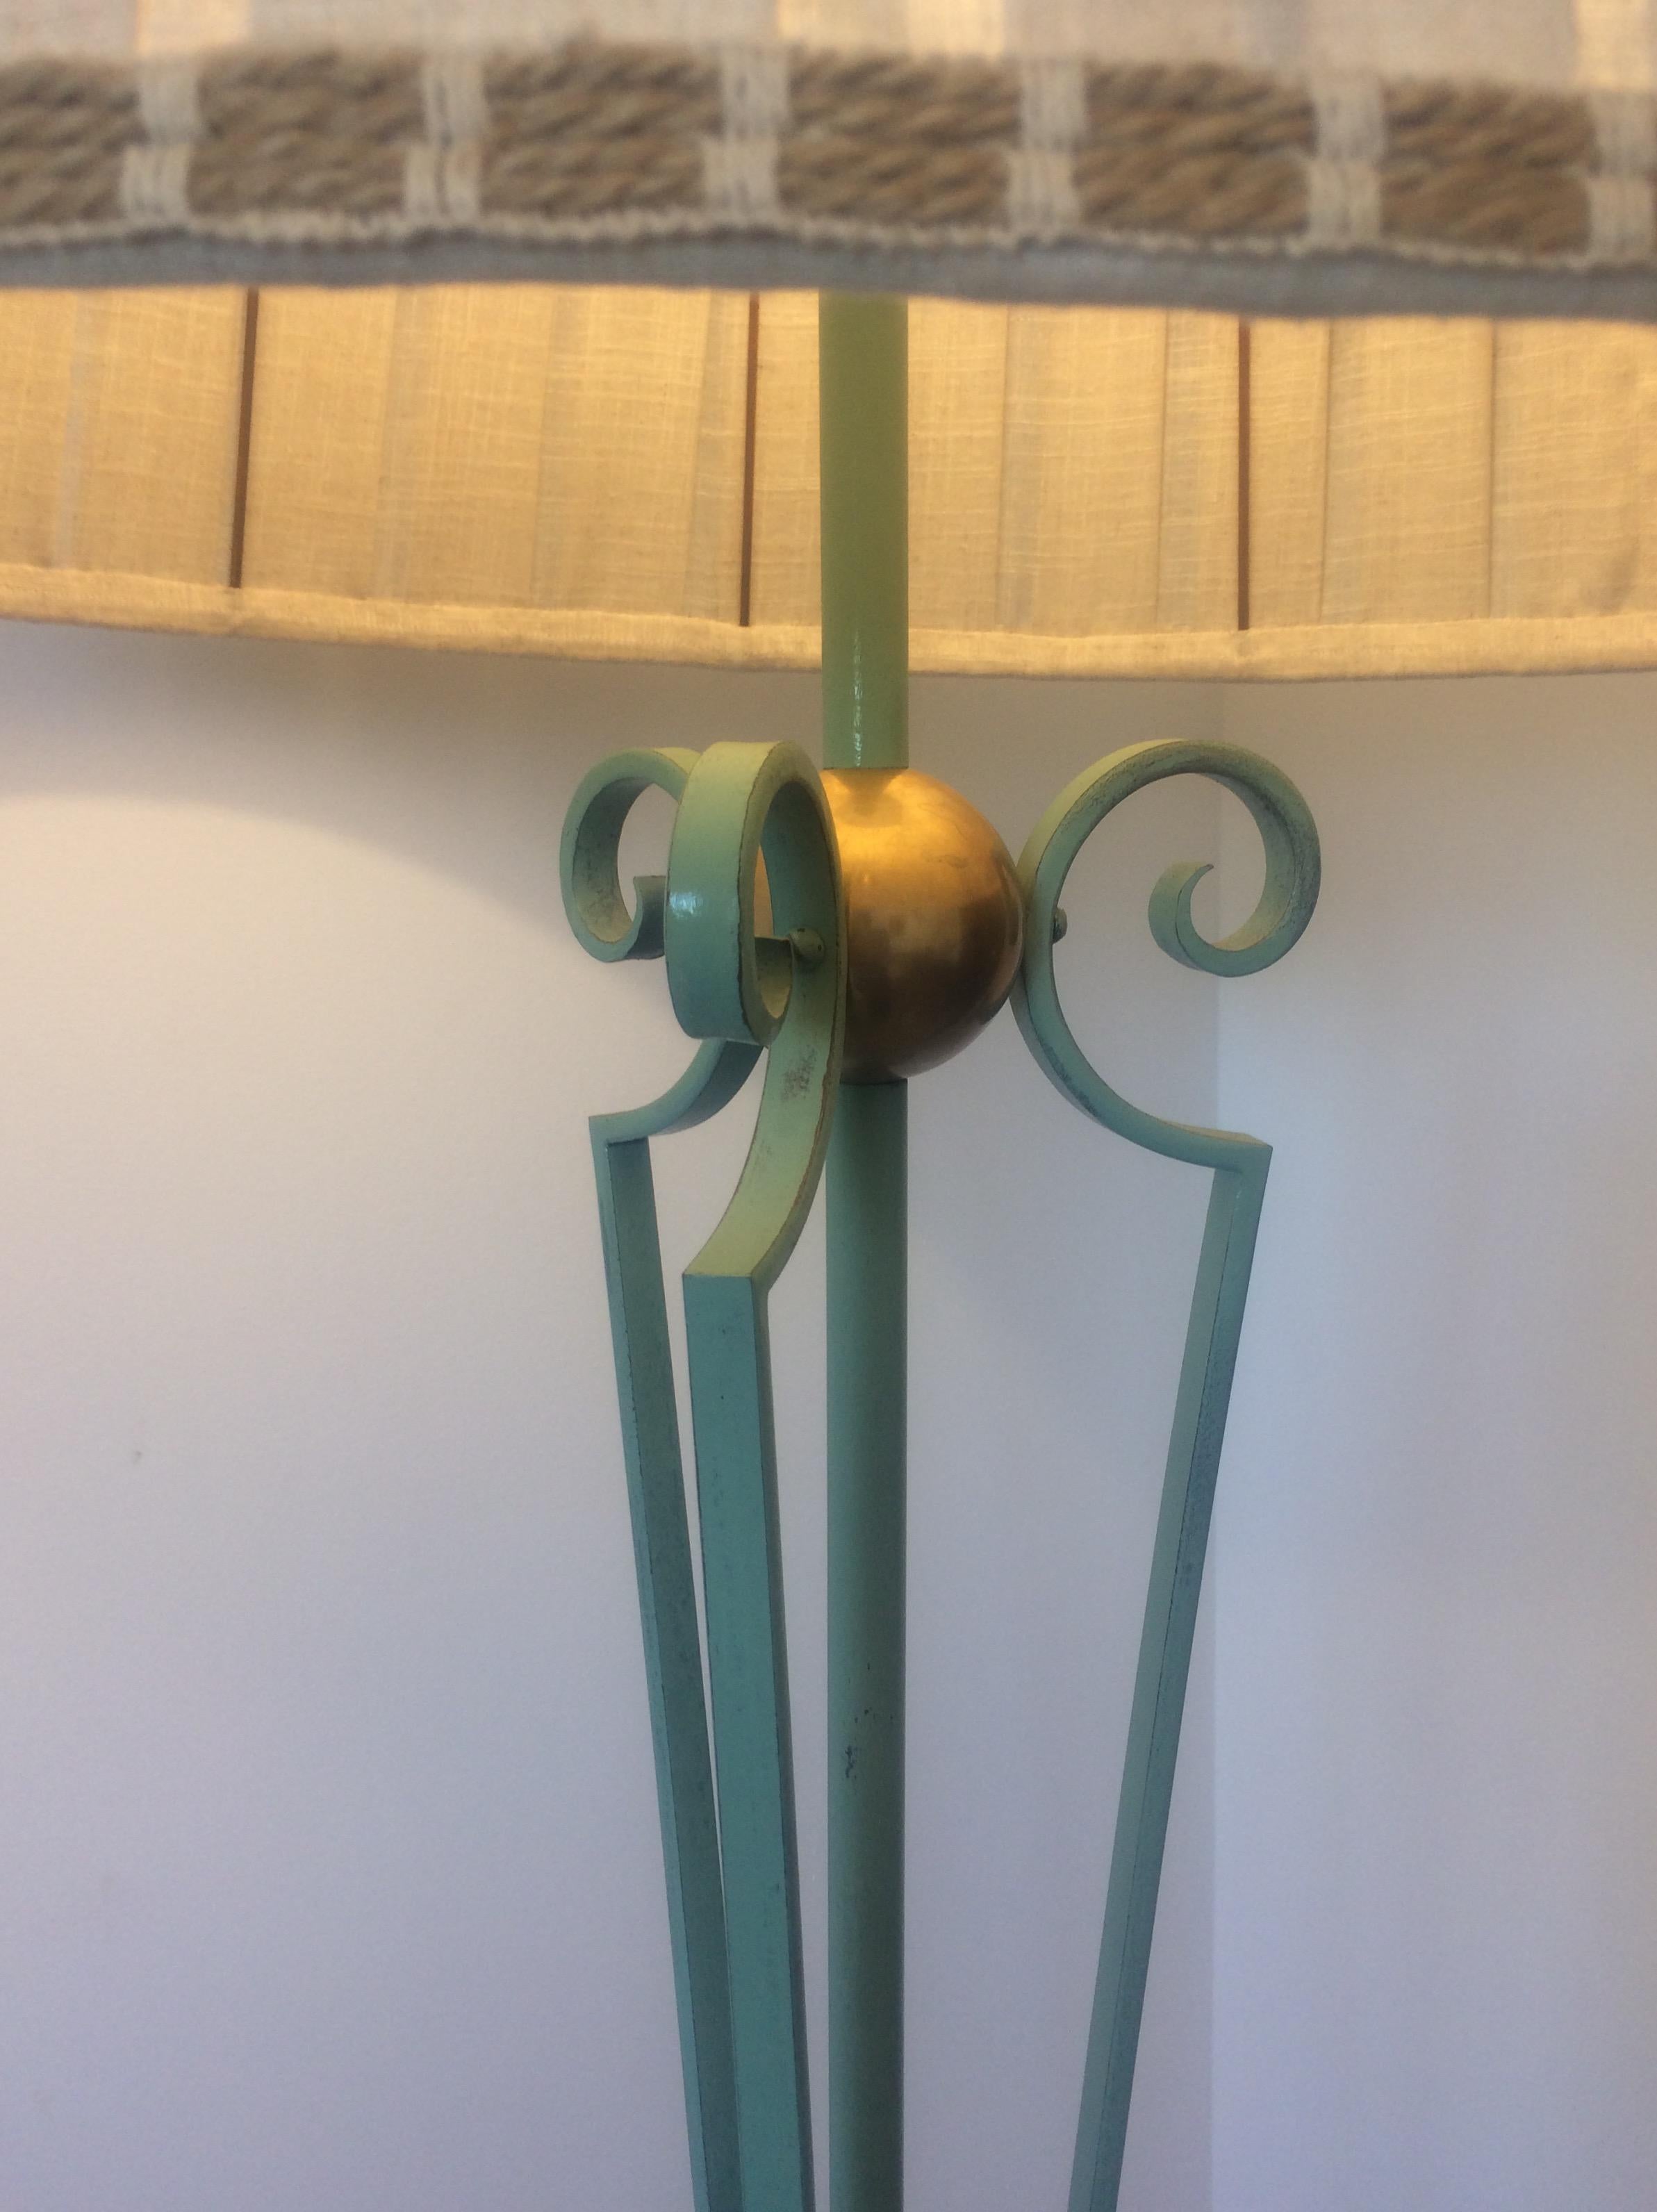 A fine, intricately detailed French wrought iron floor lamp from the design period 1950-1959 in the manner of Gilbert Poillerat. Photographs without the shade provided upon request.

This beautiful practical piece is handcrafted with an eye to